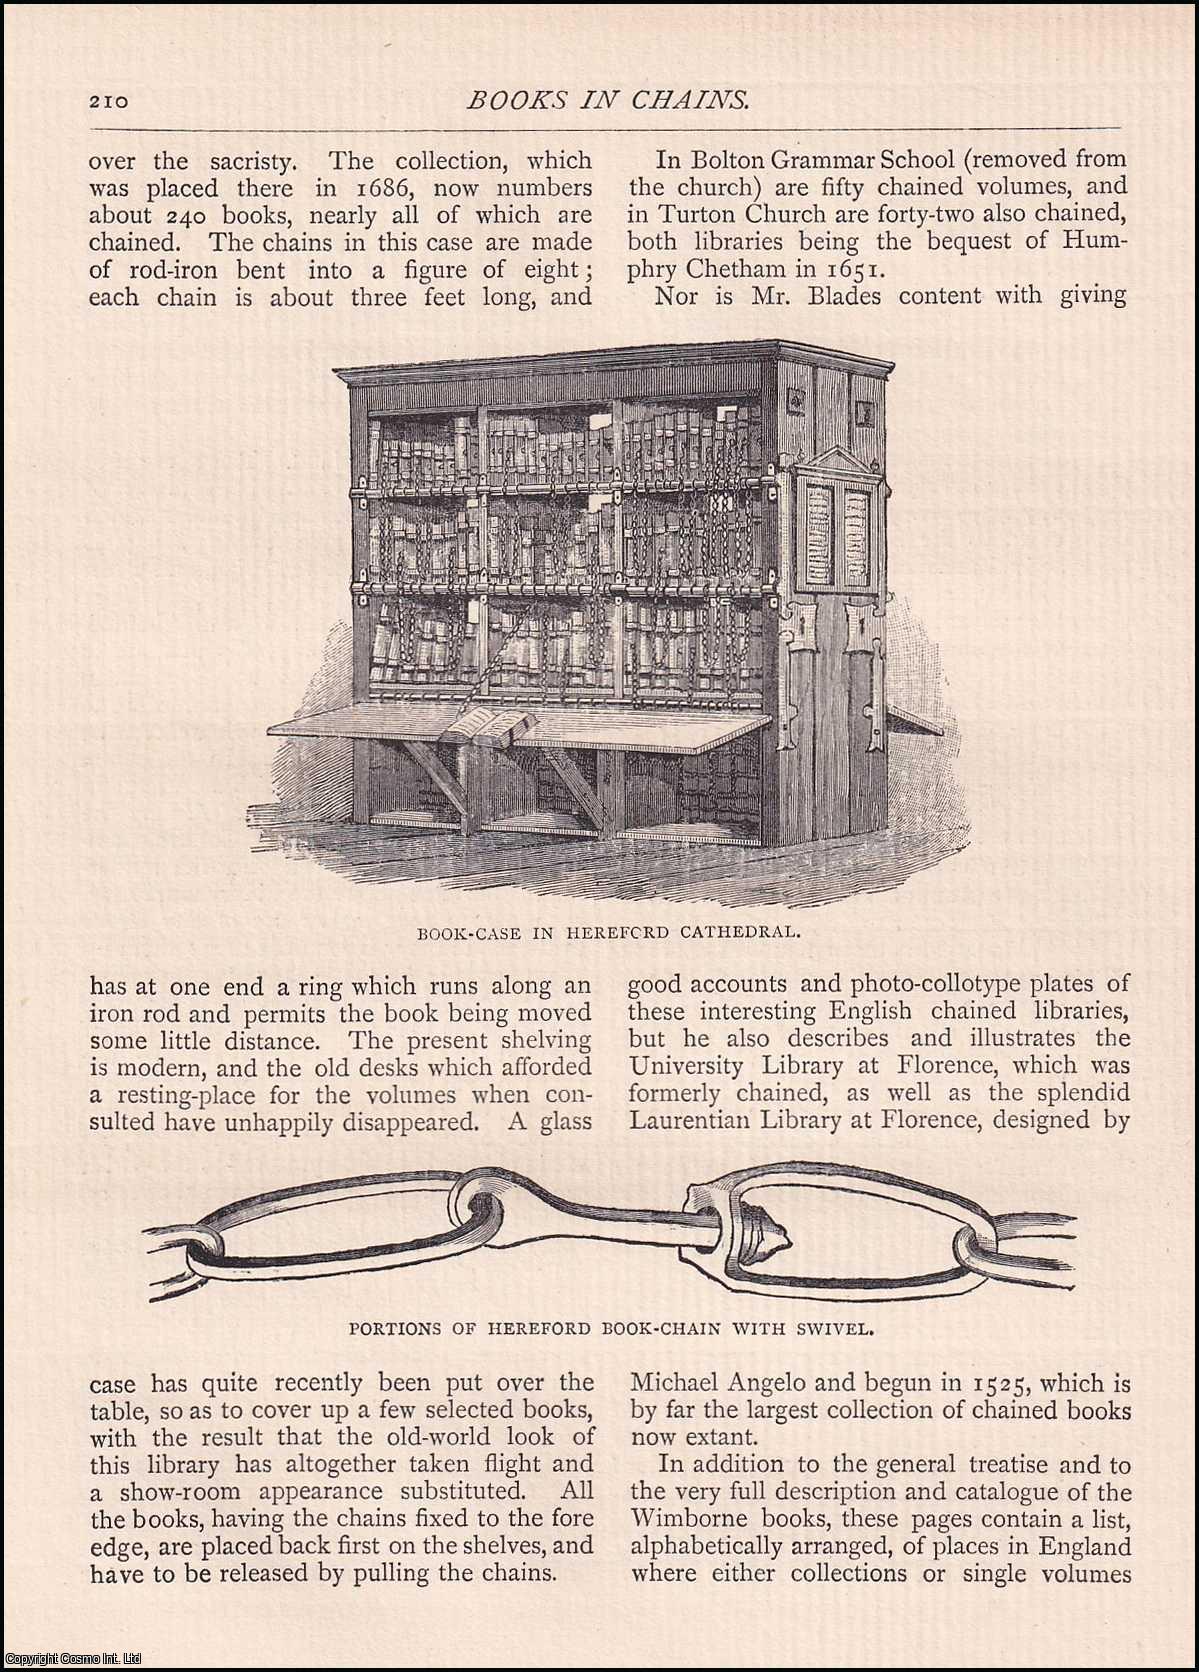 No Author Stated - Books in Chains. An original article from The Antiquary Magazine, 1890.